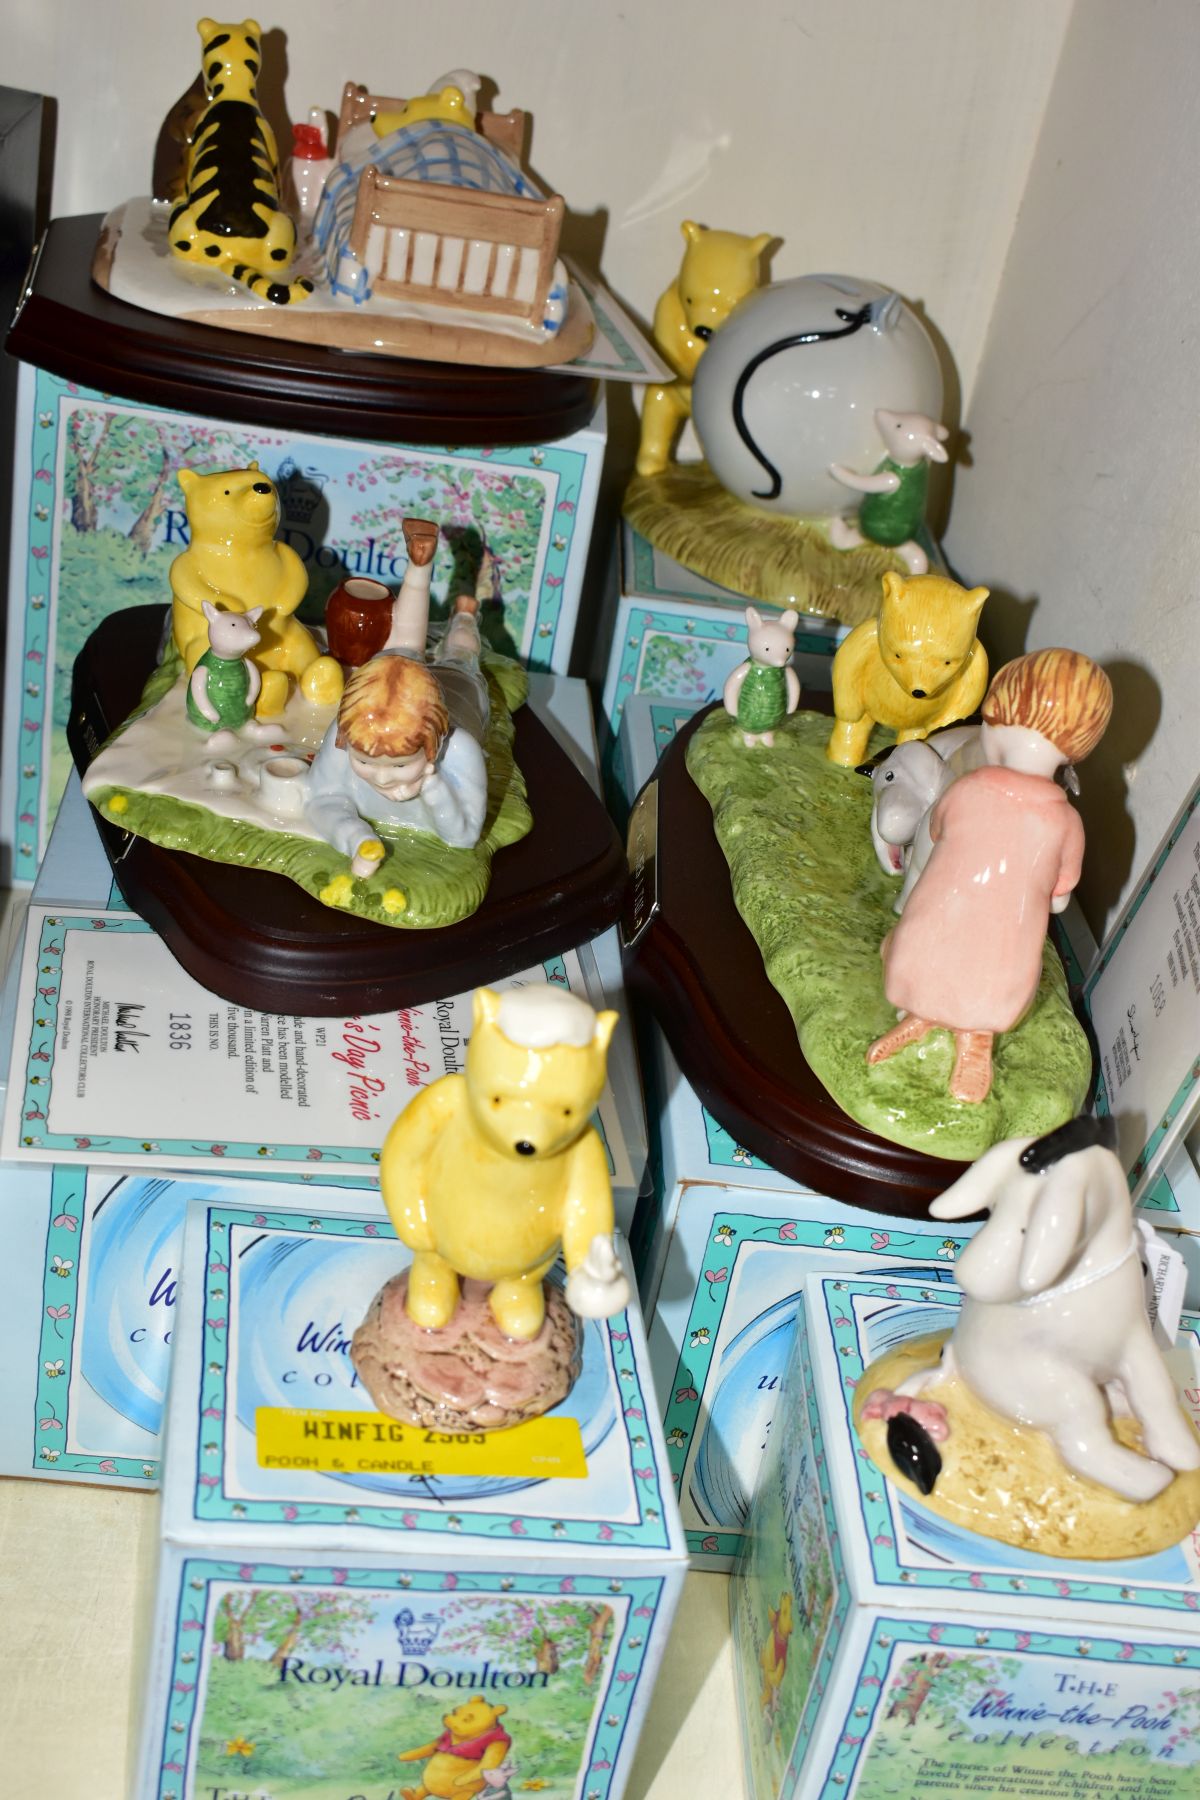 SIX BOXED ROYAL DOULTON FIGURES FROM THE WINNIE THE POOH COLLECTION, comprising Eeyore's Tail WP7 (